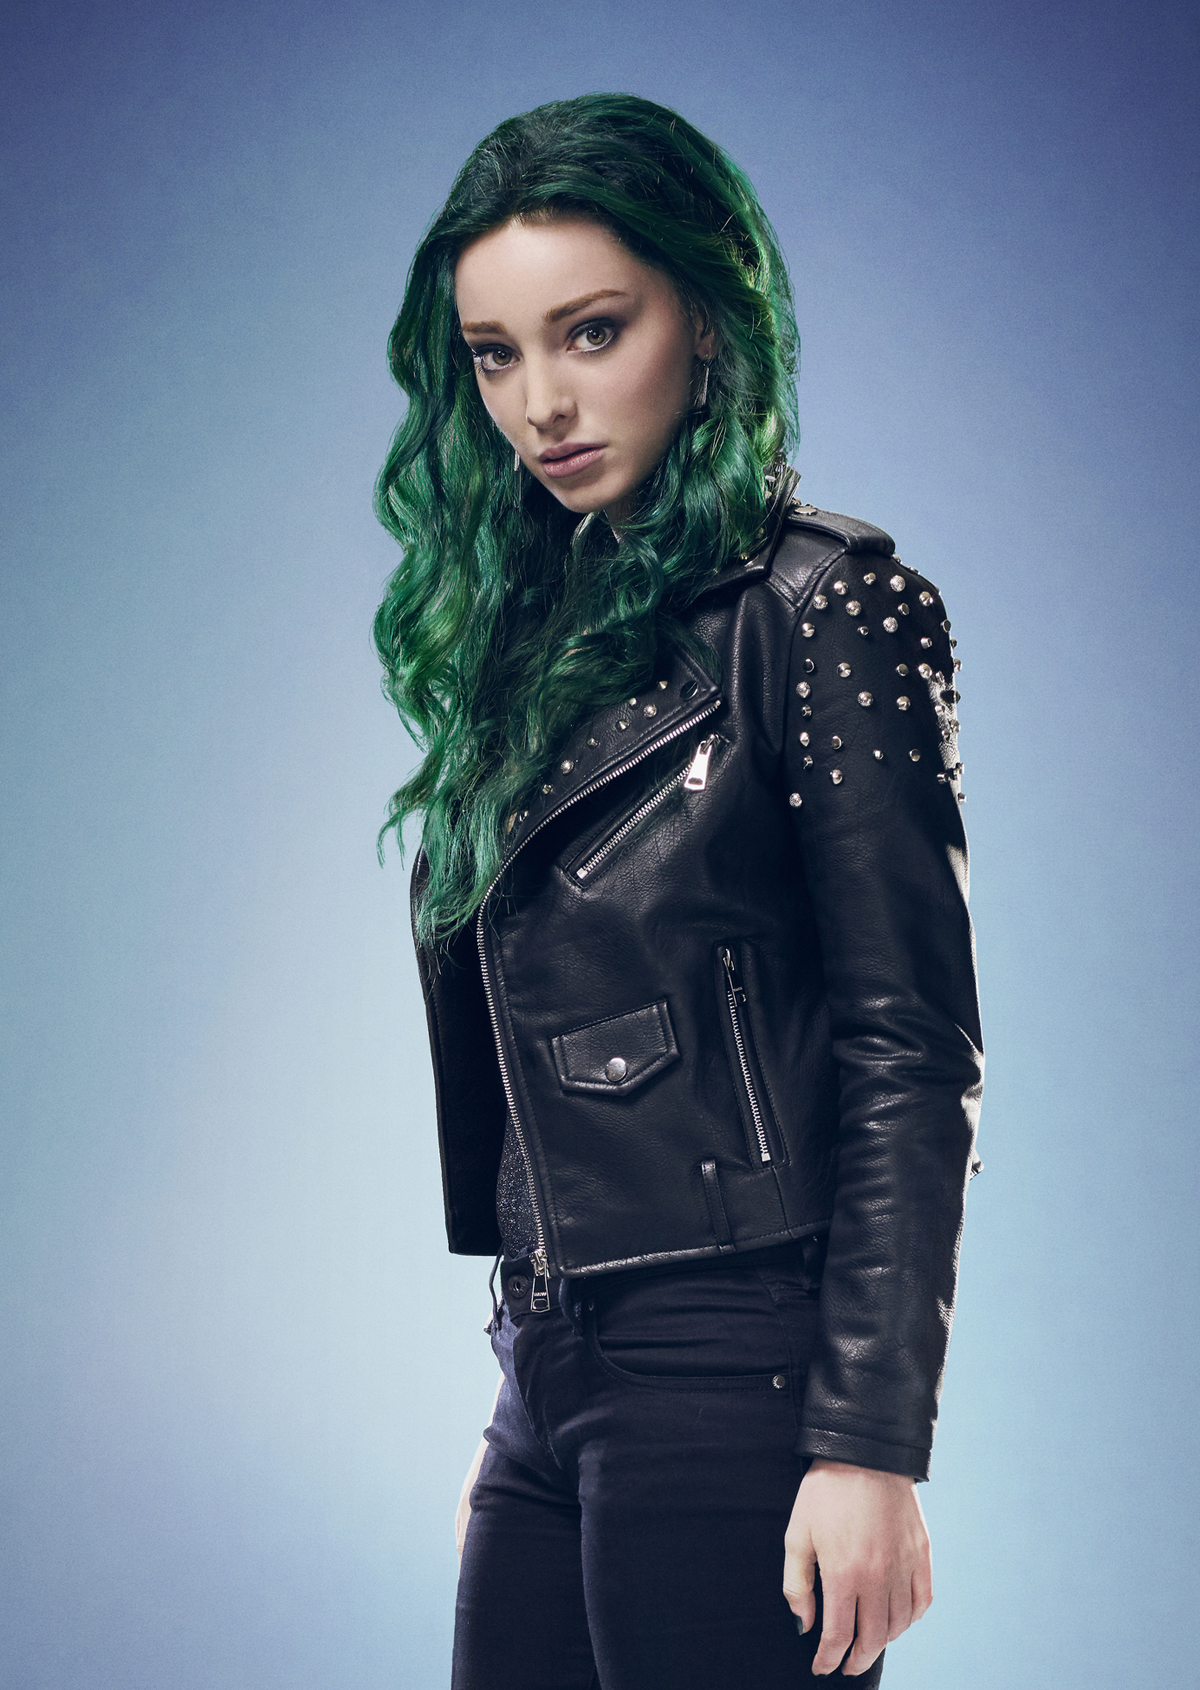 the gifted: actress emma dumont talks about polar